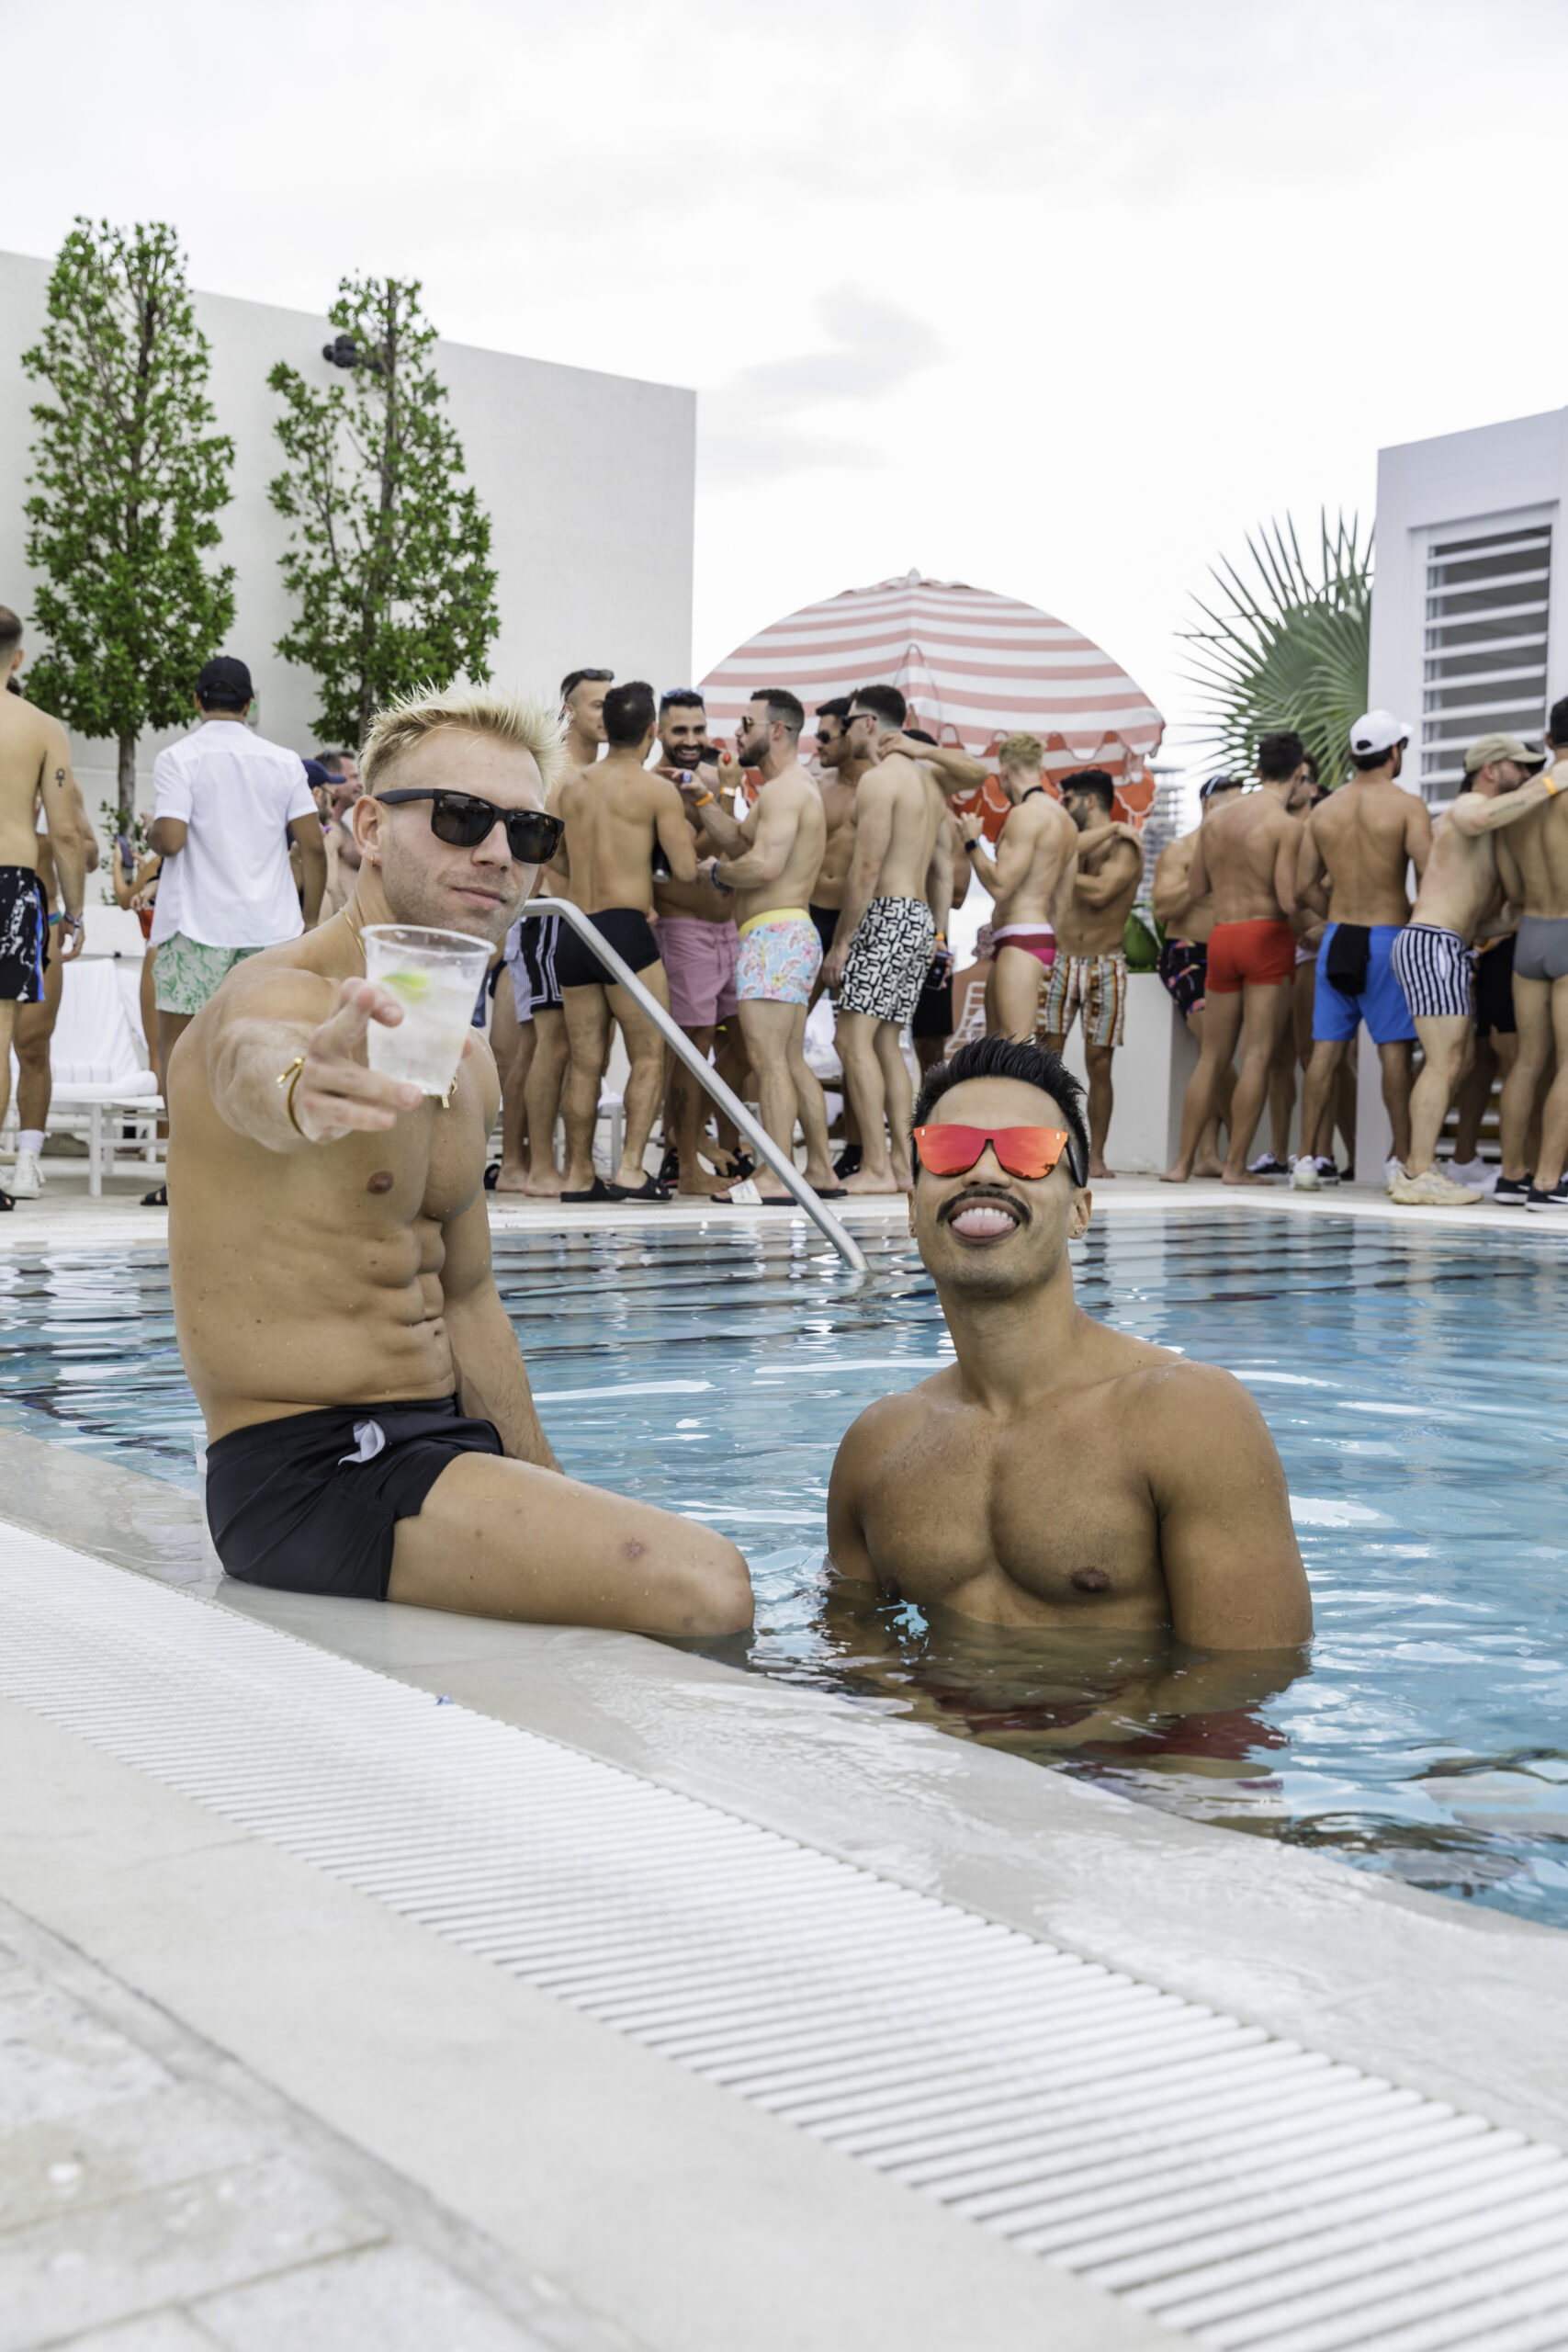 Two men are in a pool at a rooftop party. One man, wearing sunglasses, points towards the camera while holding a drink. The background shows other people socializing near the pool.